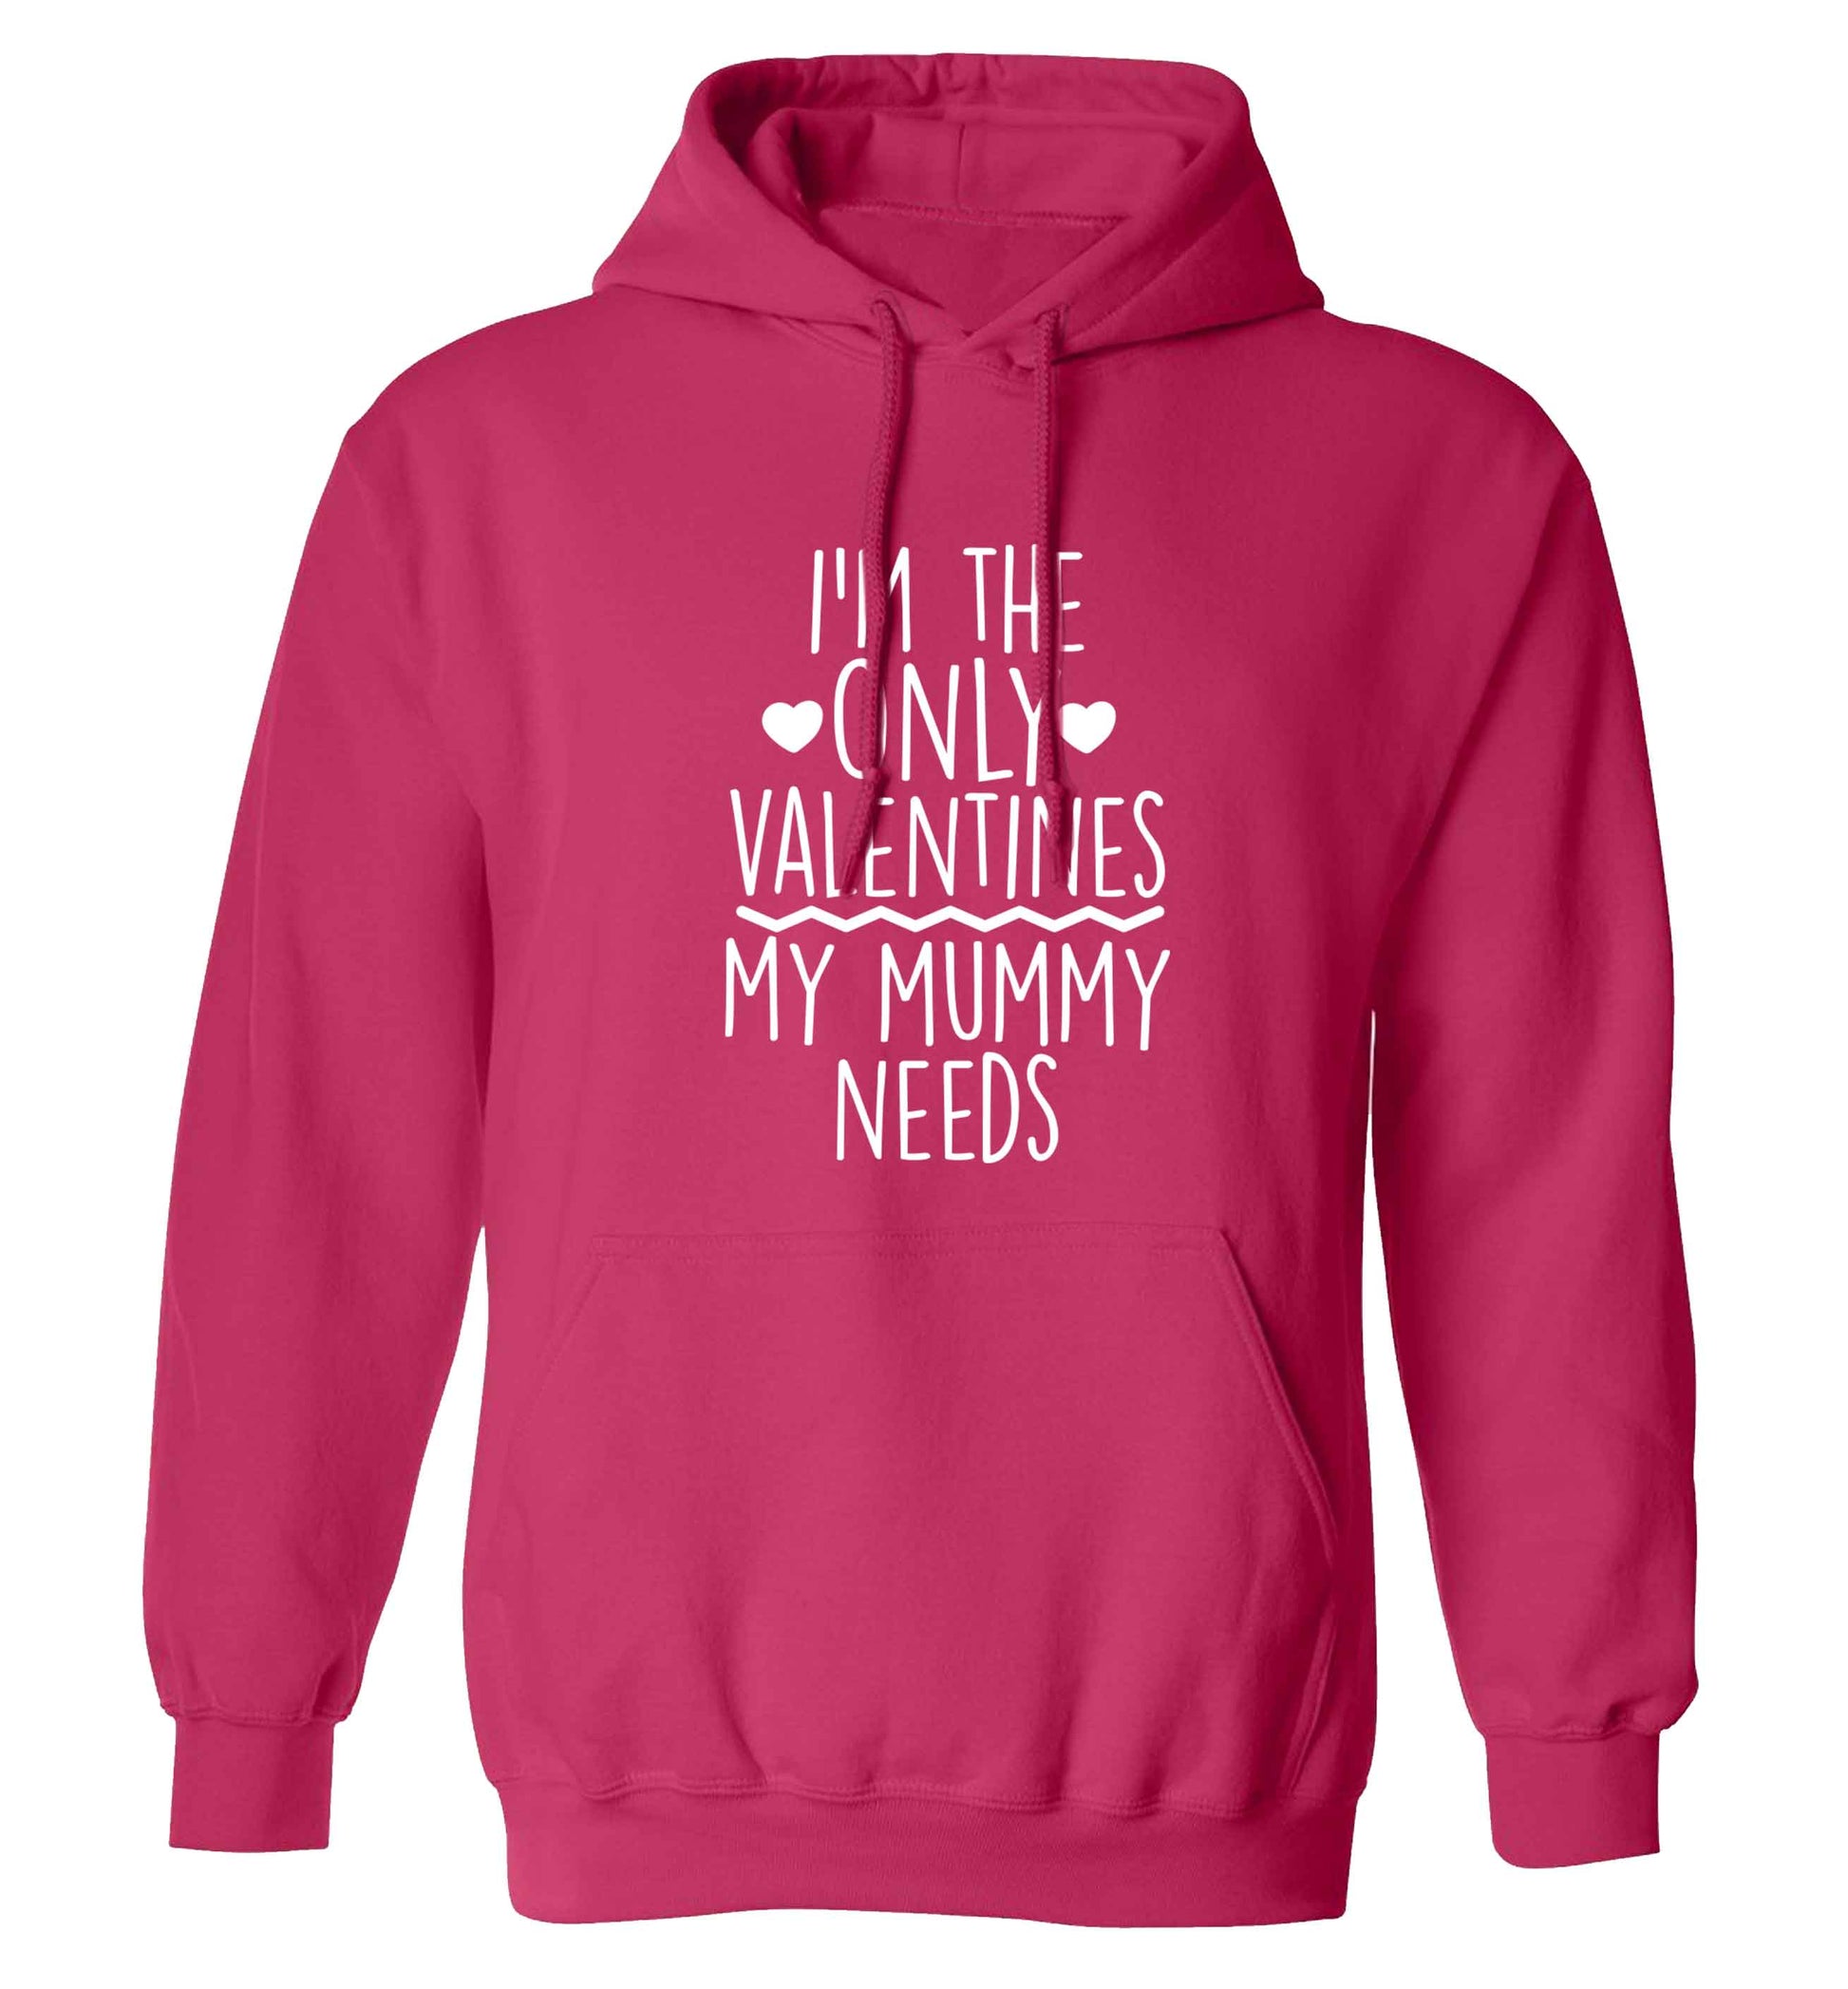 I'm the only valentines my mummy needs adults unisex pink hoodie 2XL